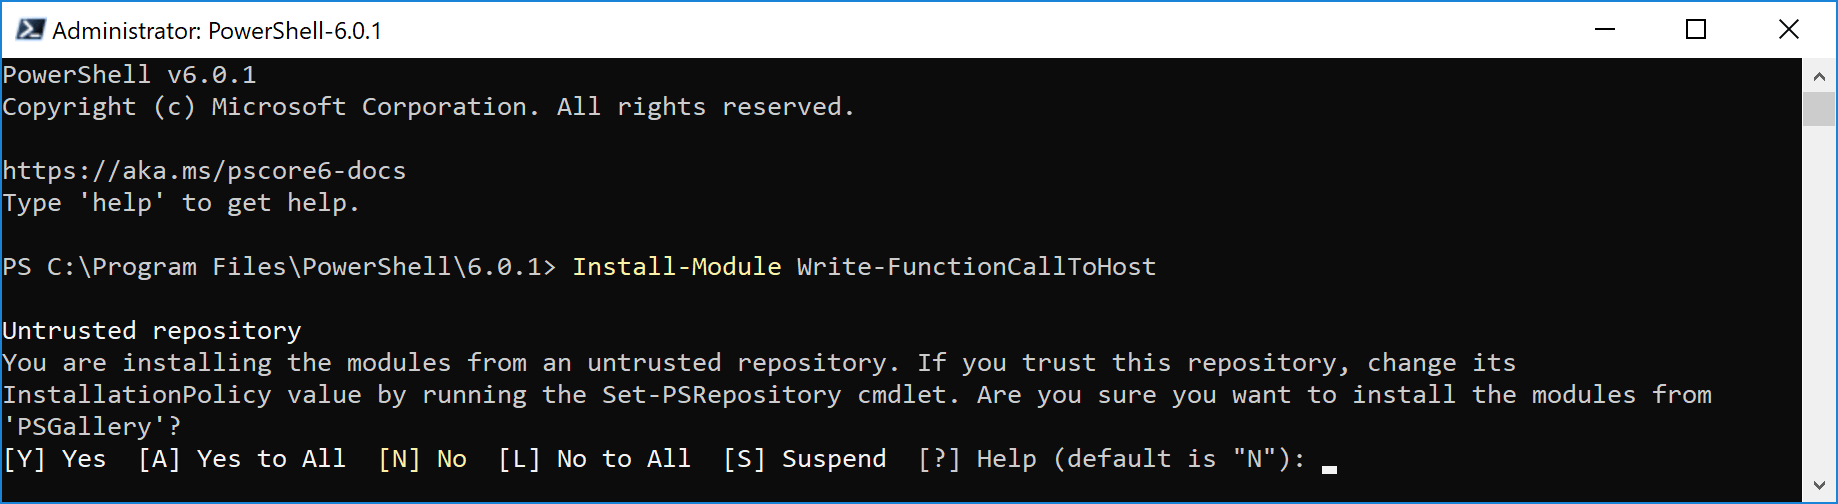 PowerShell prompting for installation of untrusted module